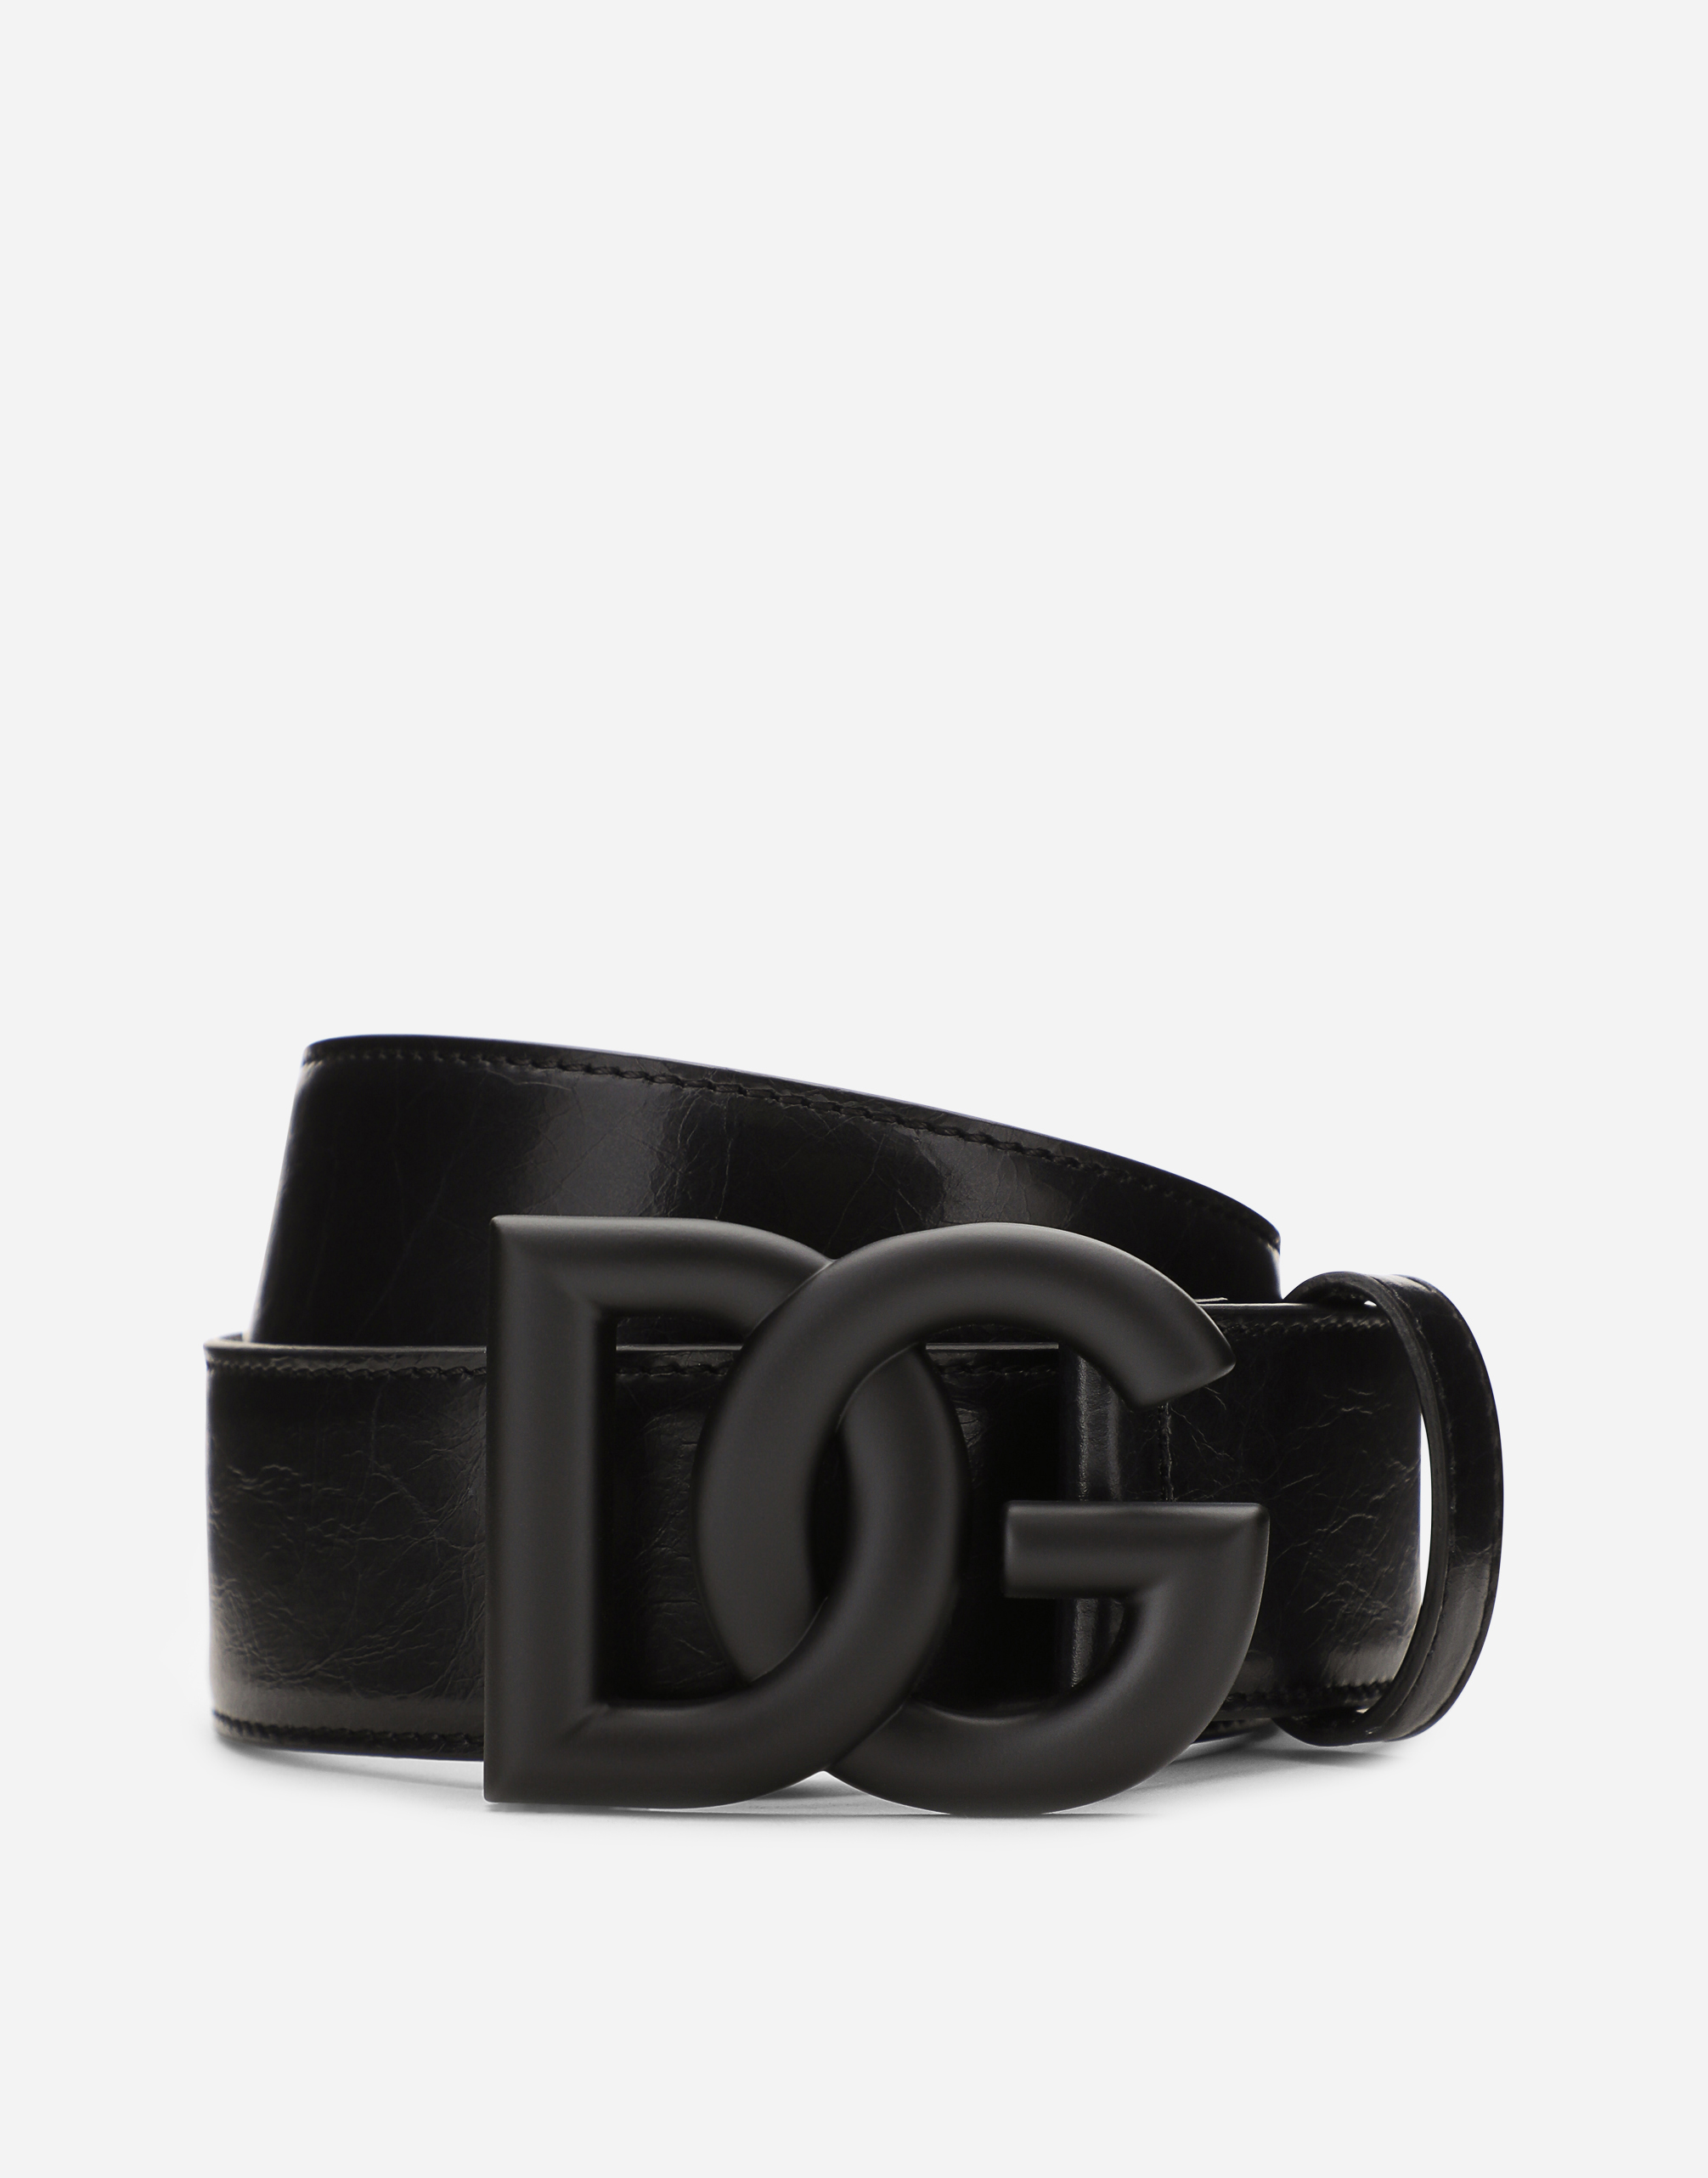 Matte nappa leather belt with crossover DG logo buckle in 